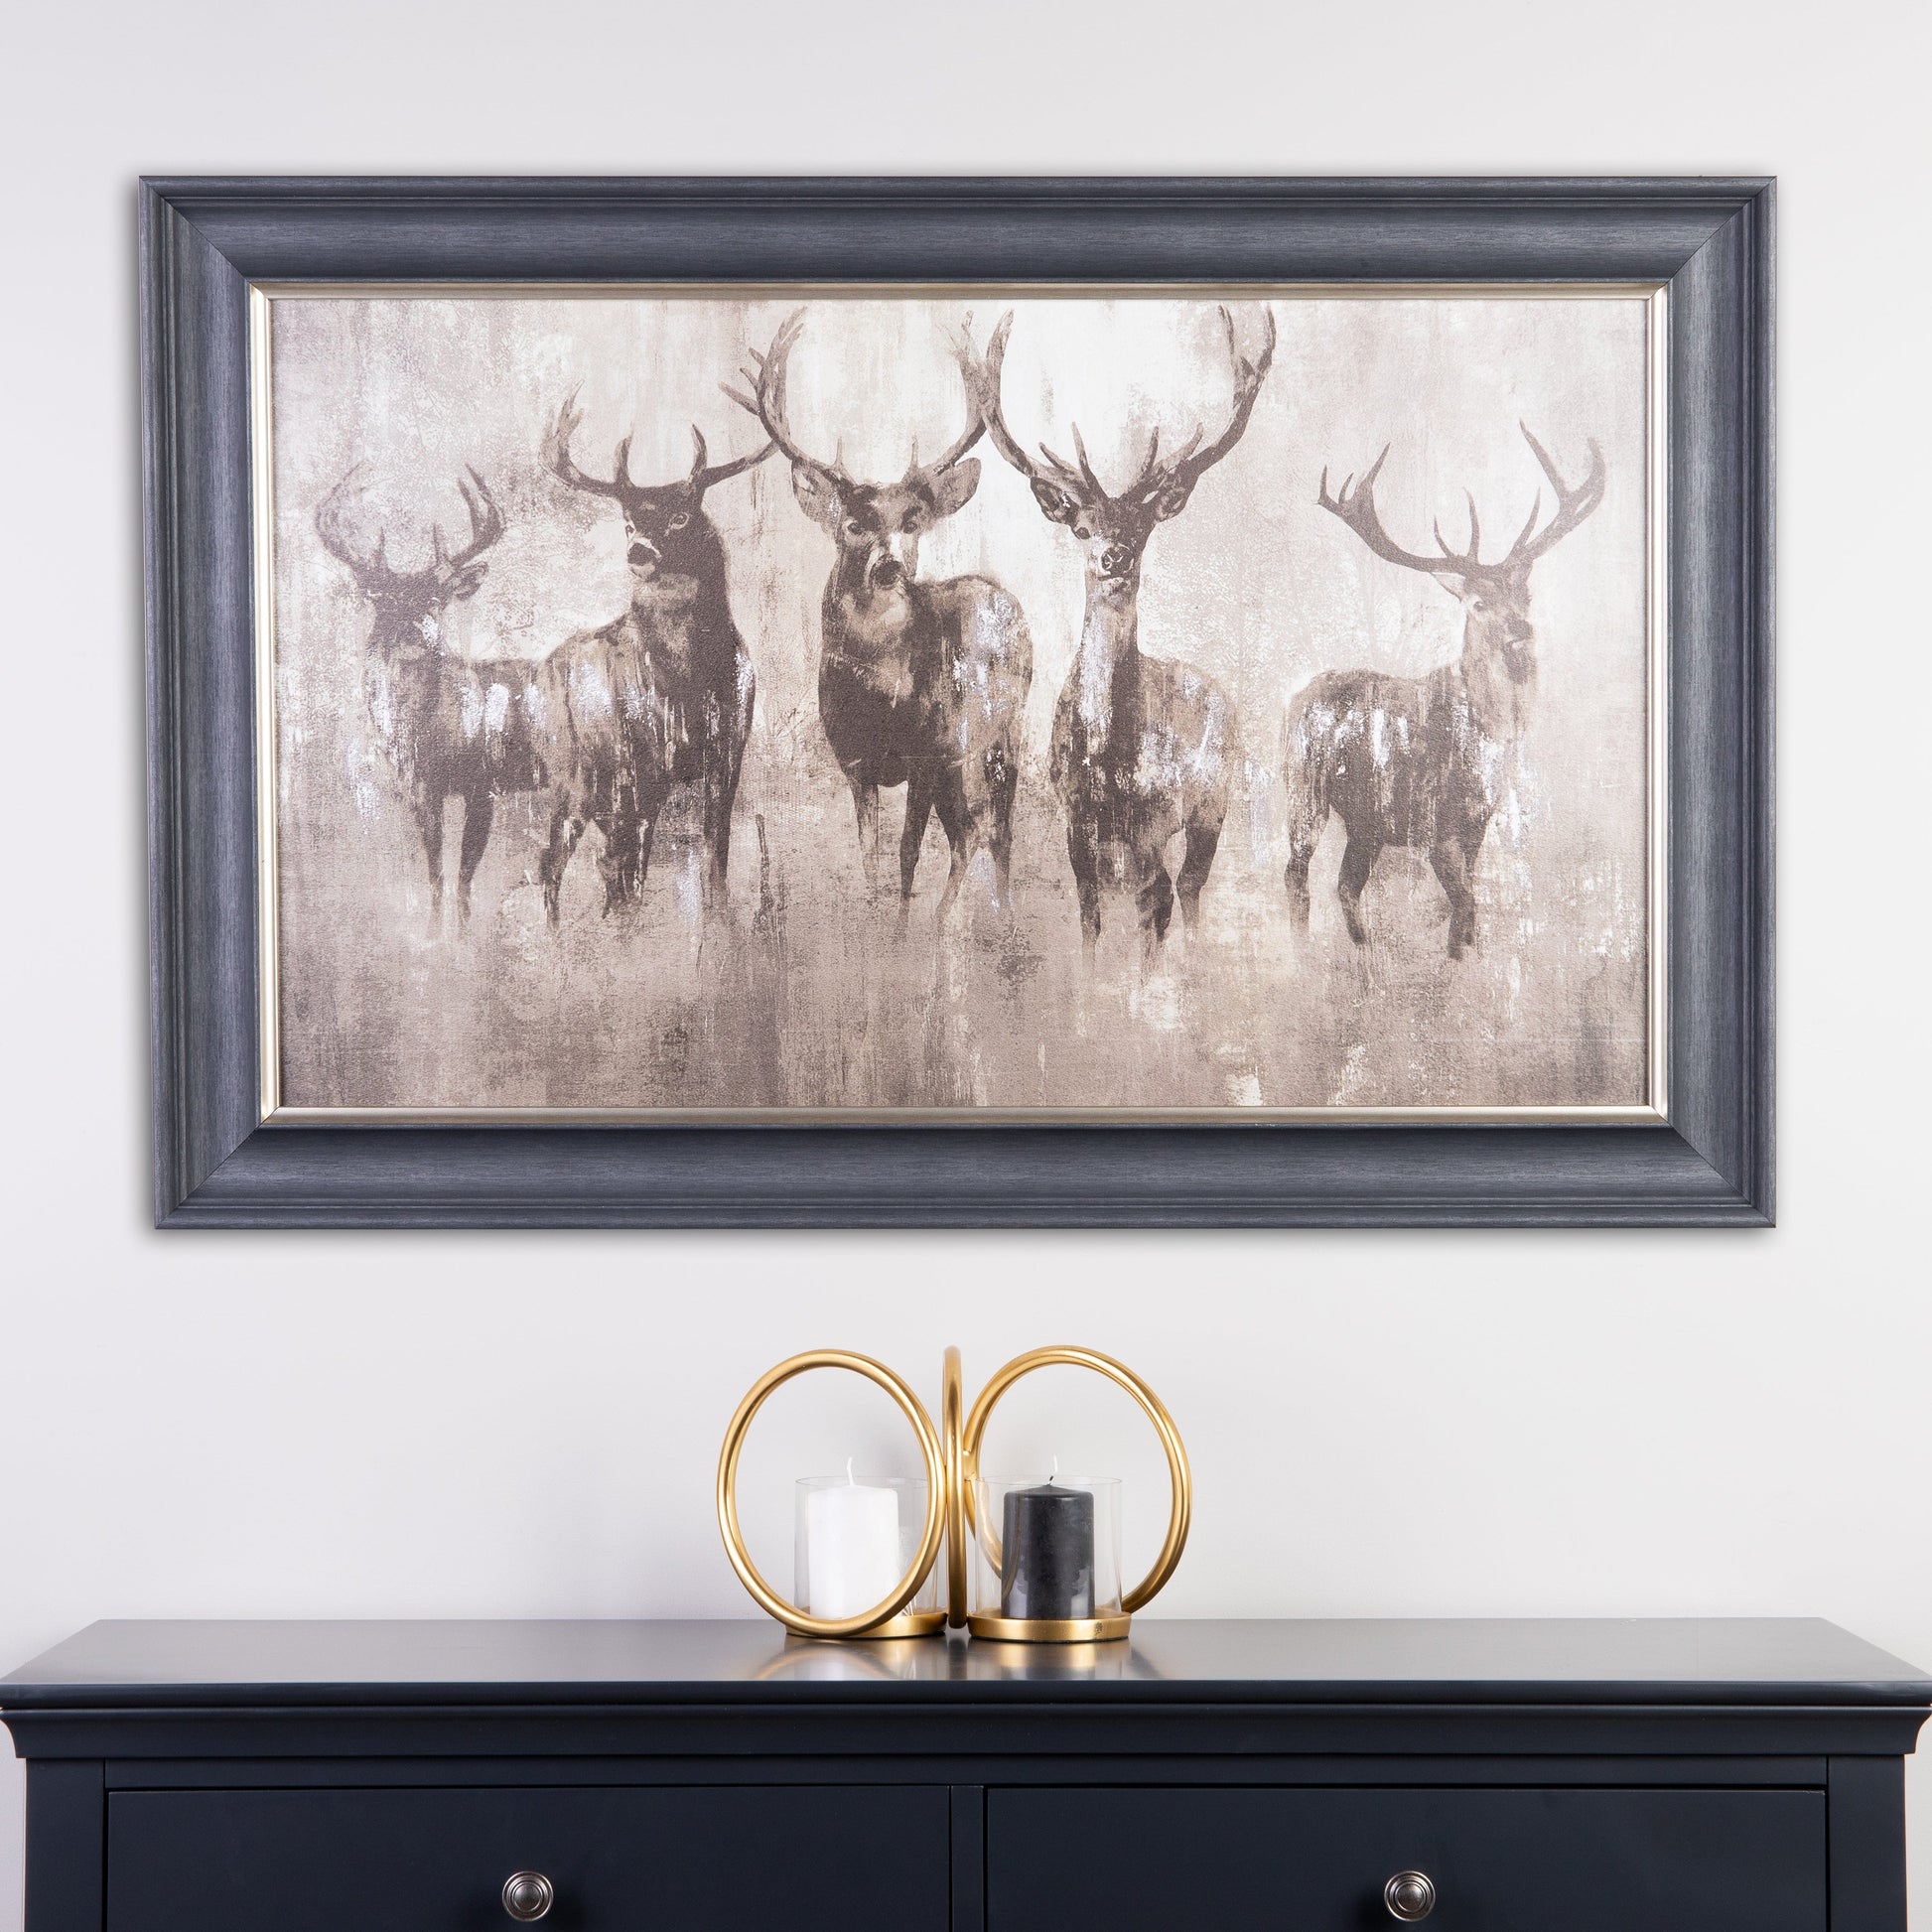 Pictures  -  Stags Night Framed Wall Art 119cm x 74cm  -  60003240